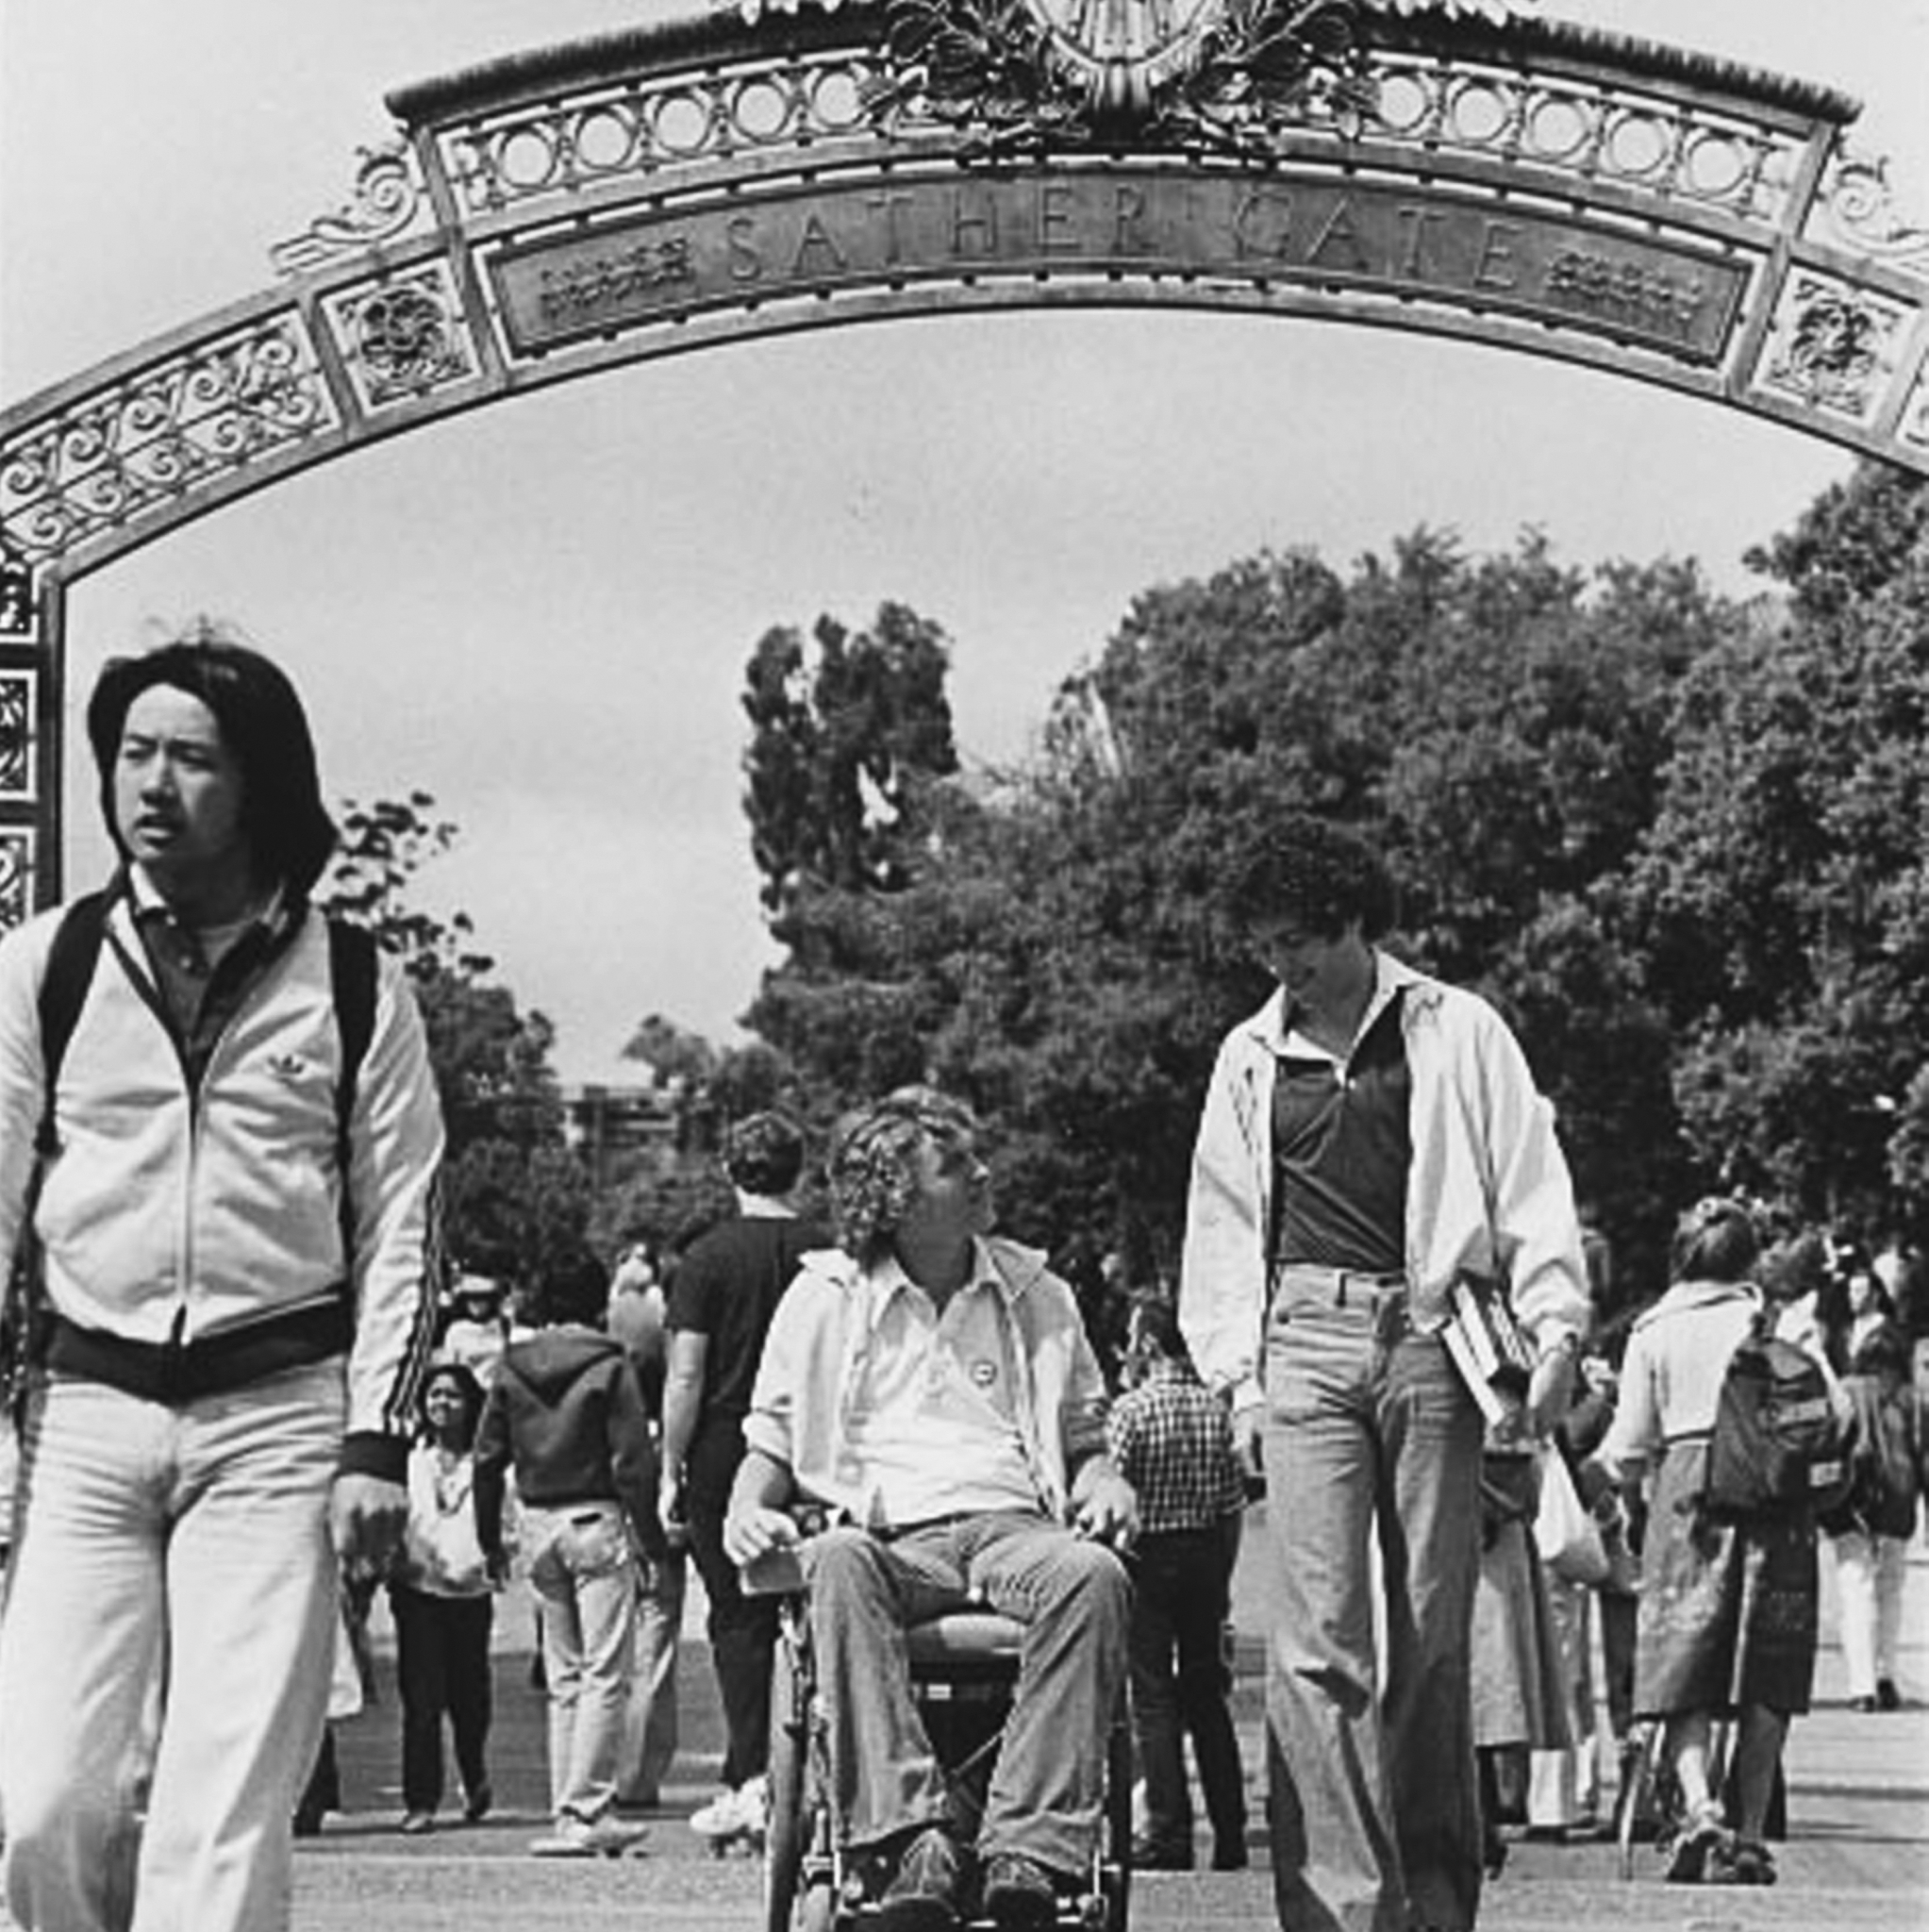 Sather Gate man in wheelchair and others walking